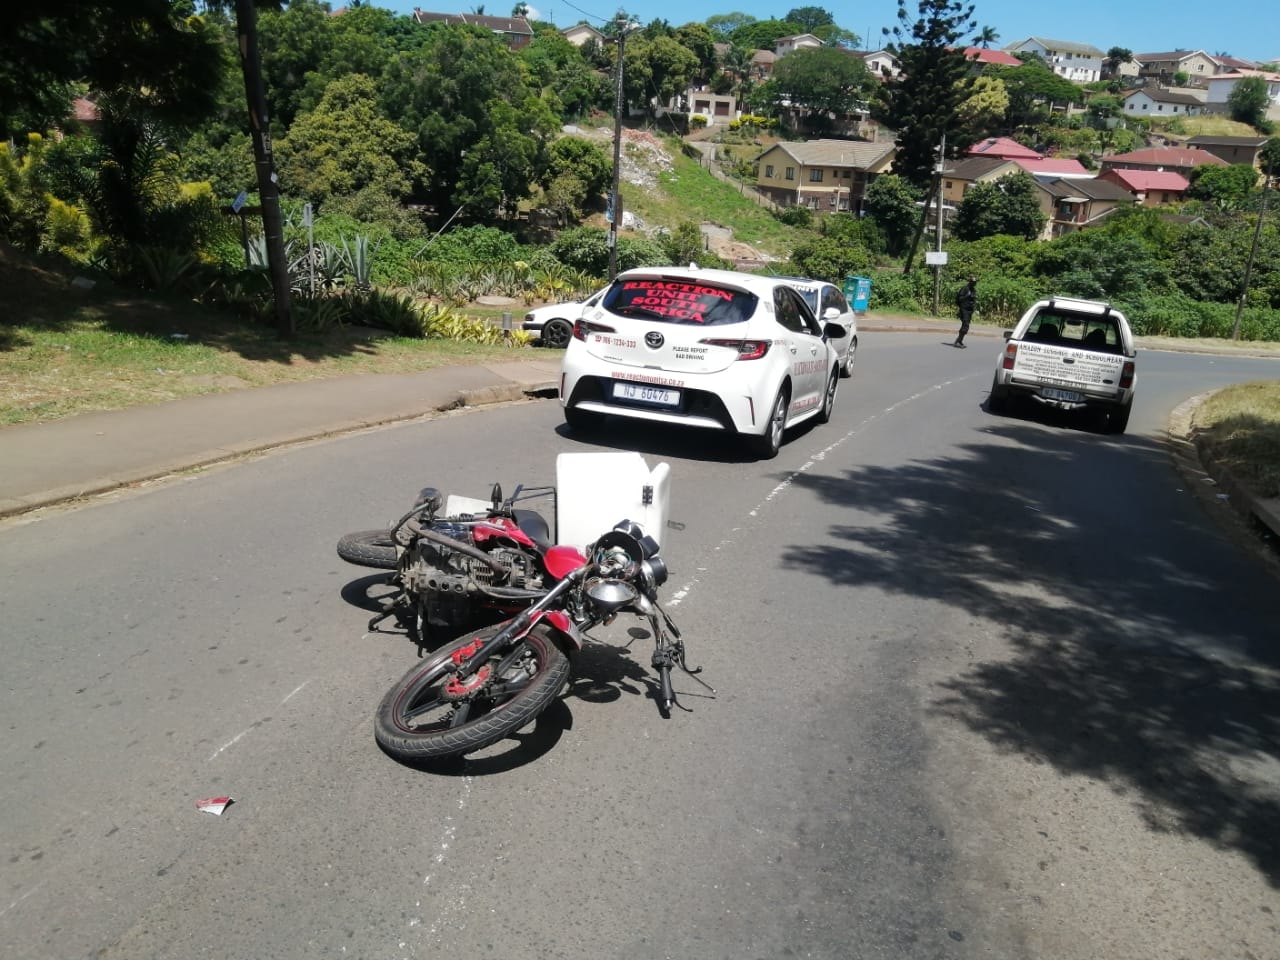 Motorcyclist Knocked Down: Everest Heights - KZN